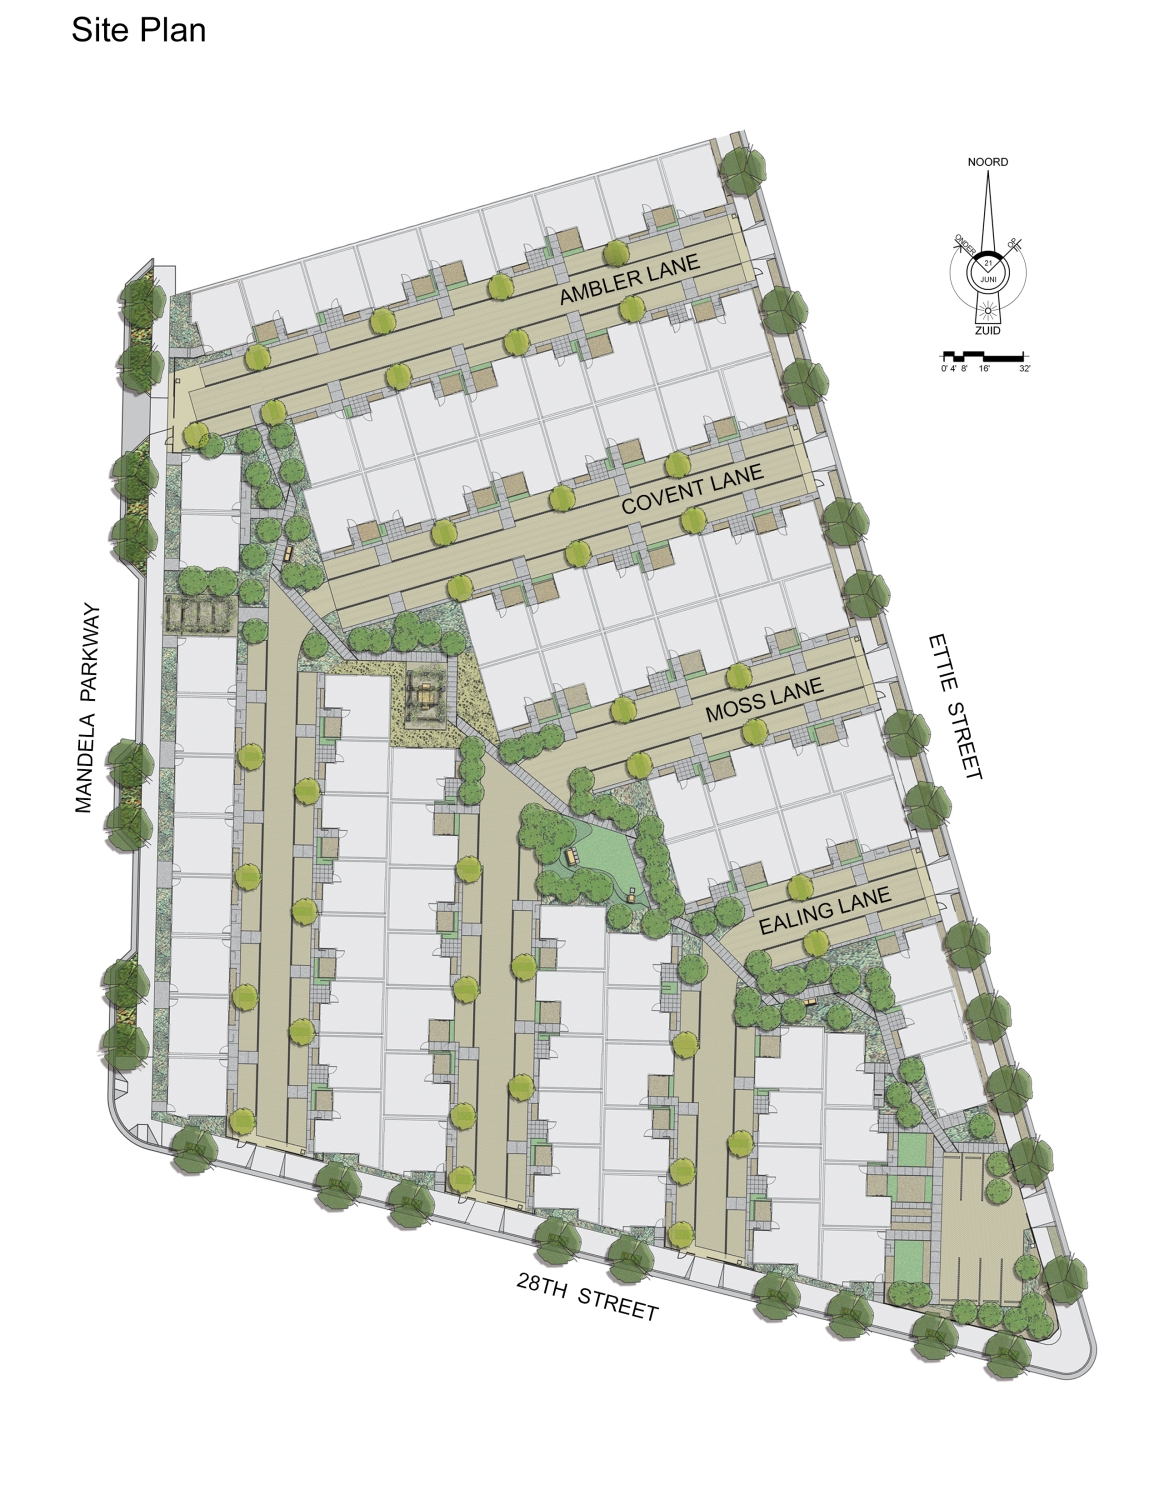 Site plan for West End Commons in Oakland, Ca.